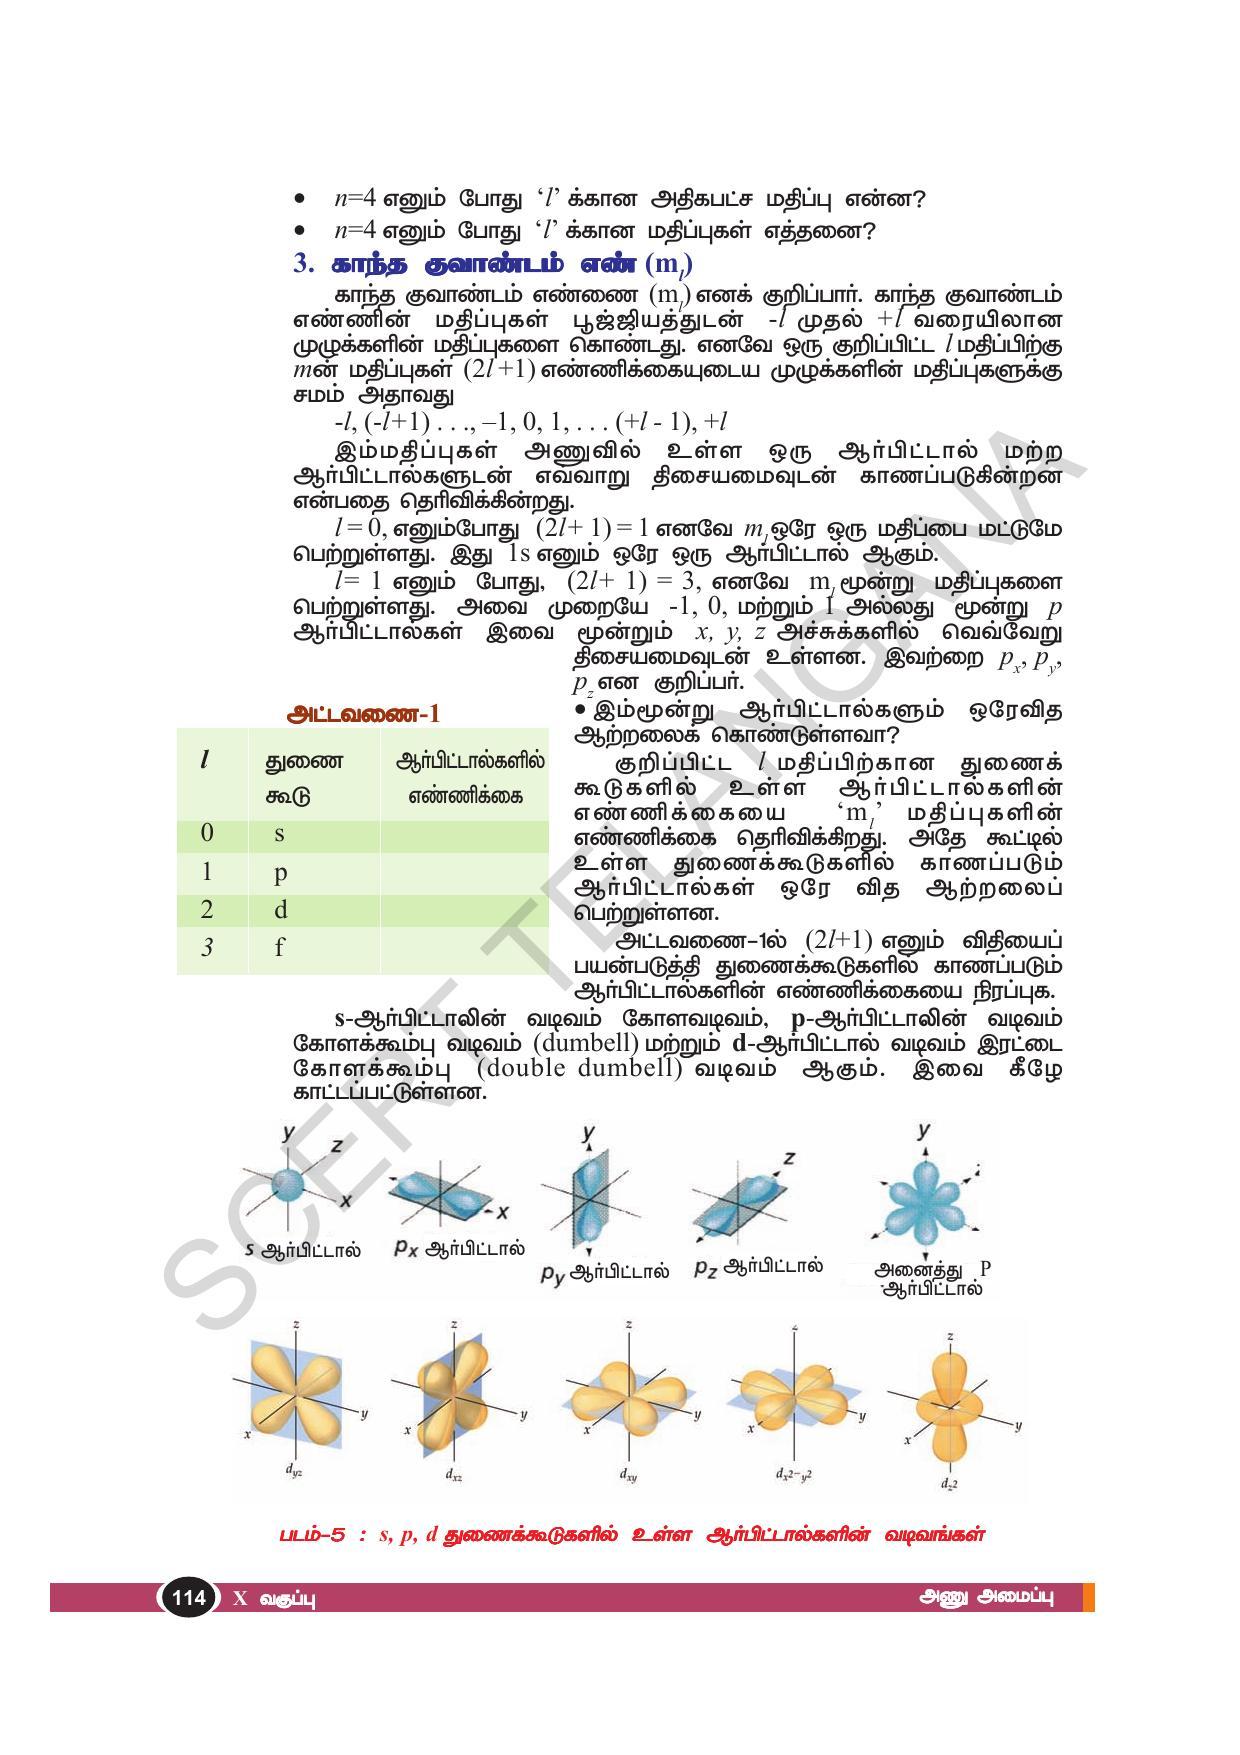 TS SCERT Class 10 Physical Science(Tamil Medium) Text Book - Page 126